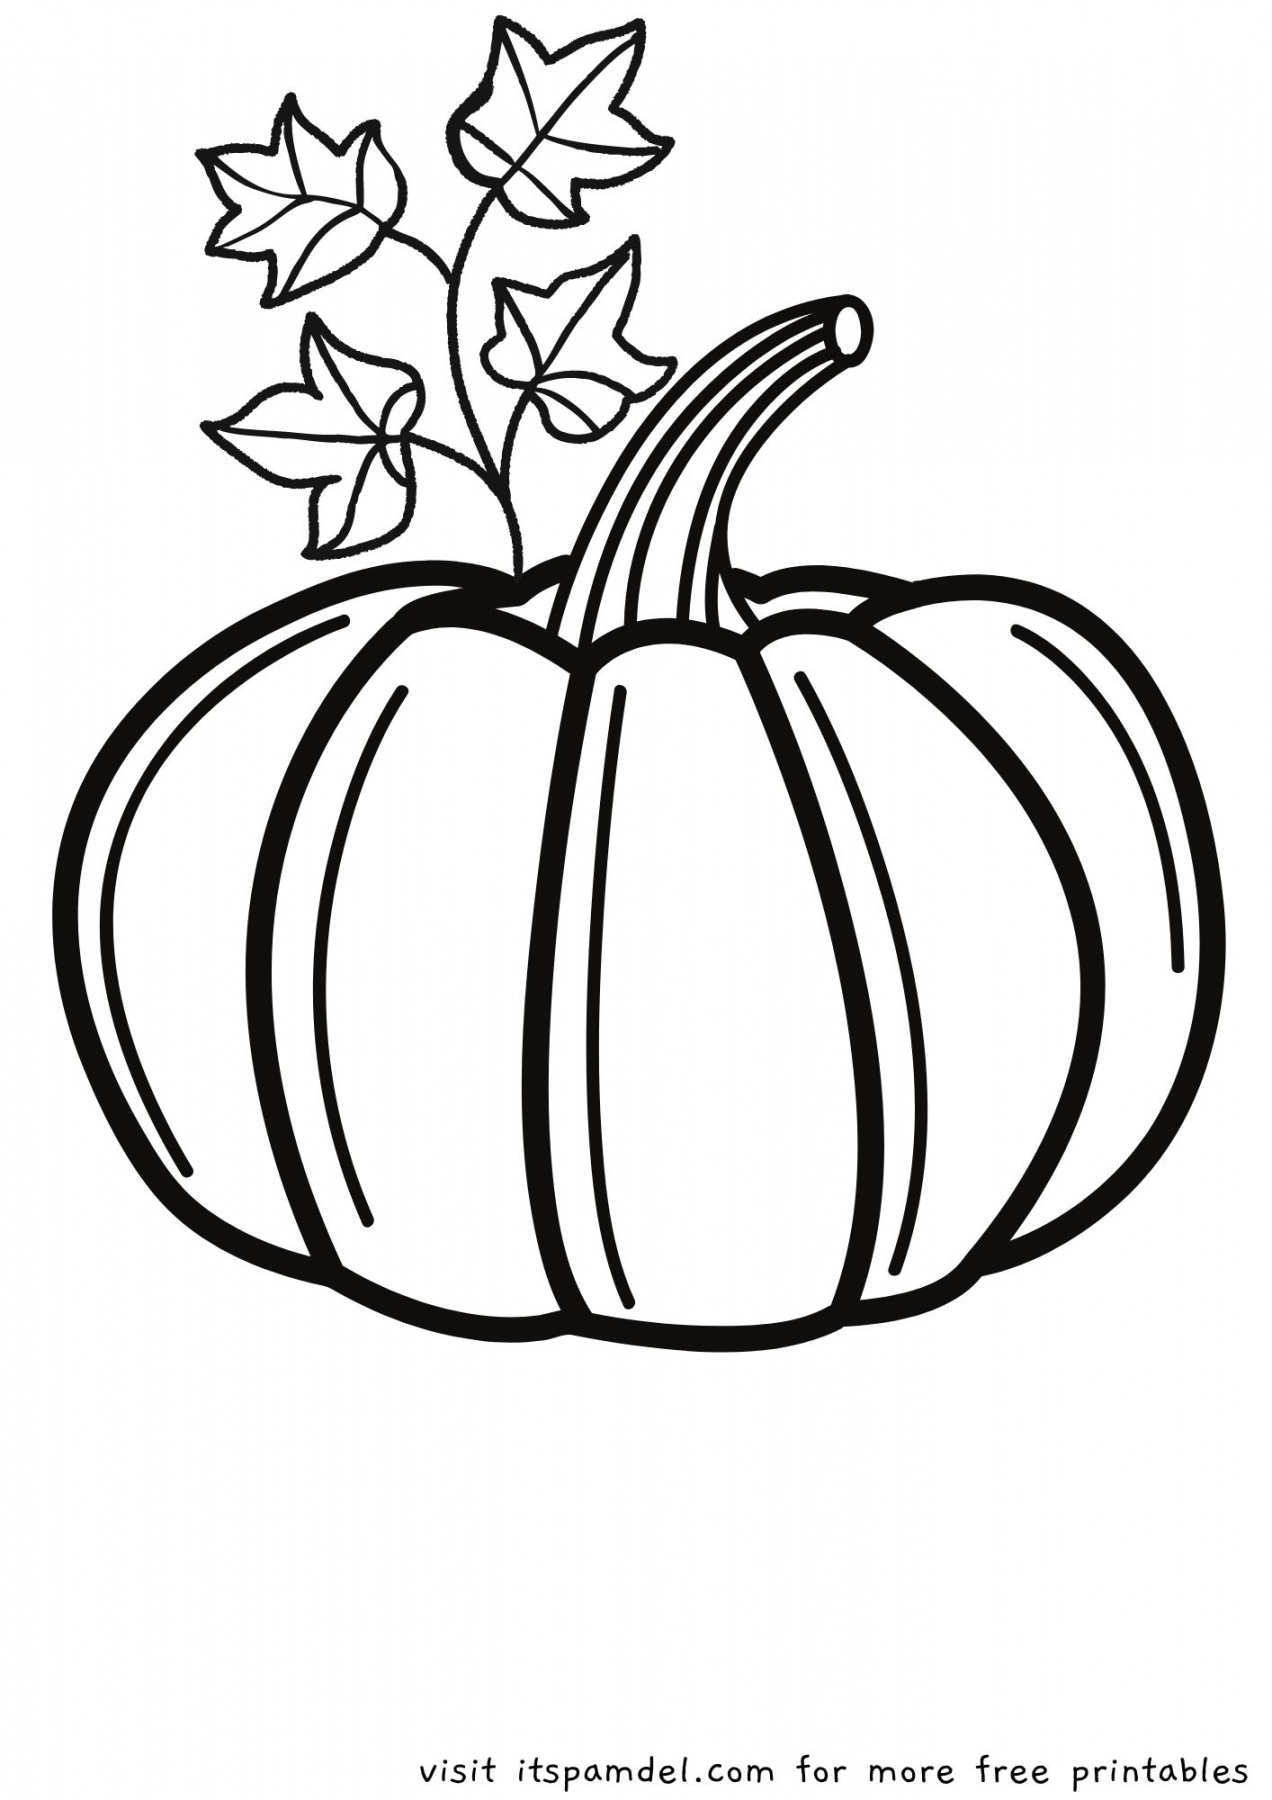 Free Printable Coloring Pages For Fall - Printable - Free Printable: Fall Coloring Pages for Kids  It